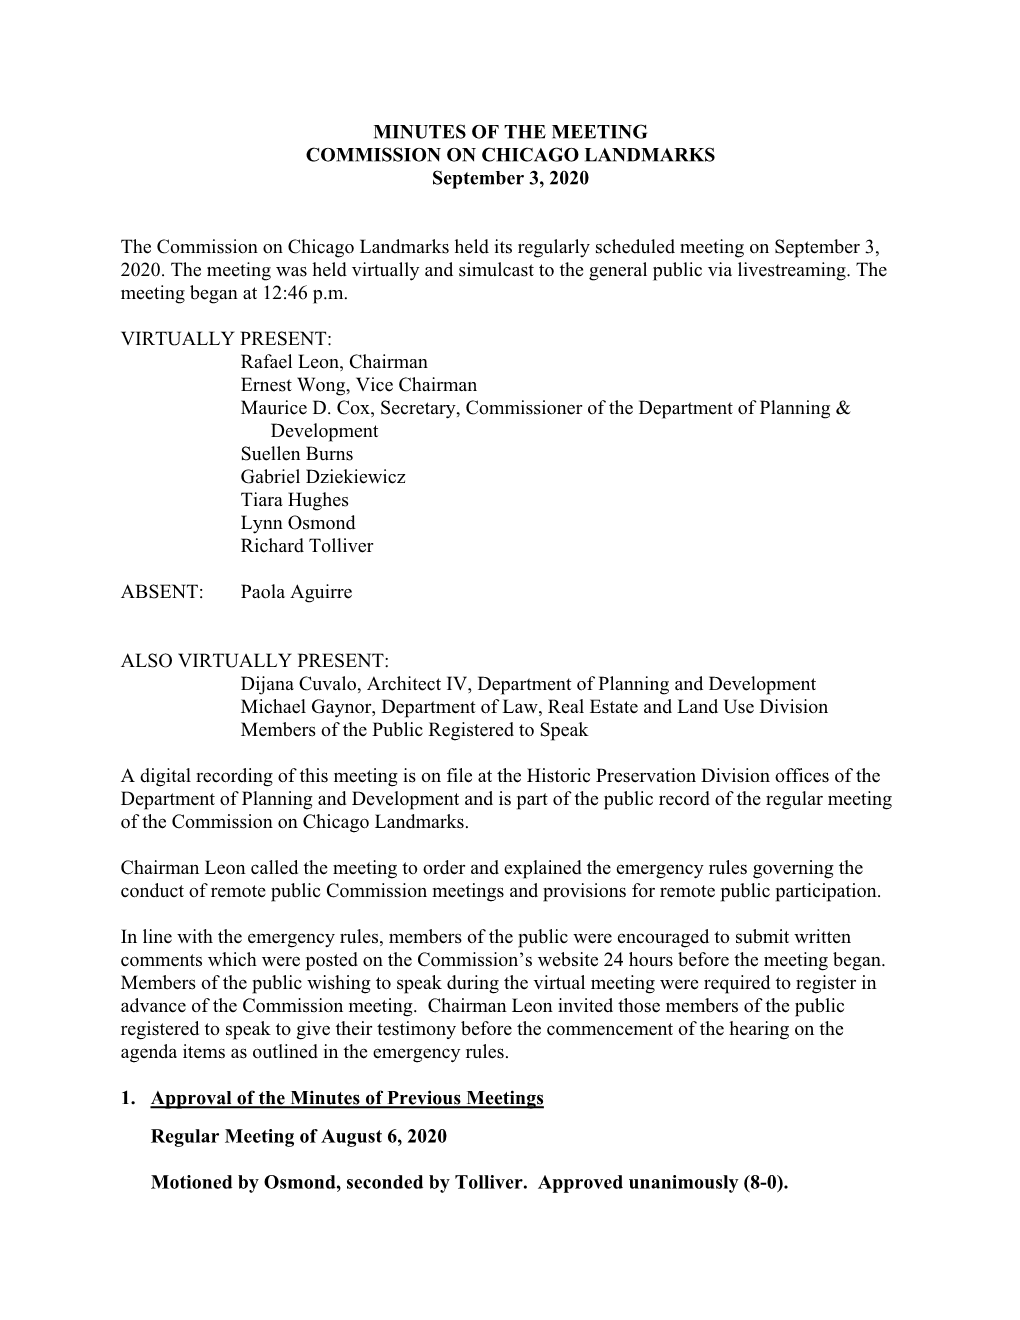 Meeting Minutes Permit Review Committee Commission on Chicago